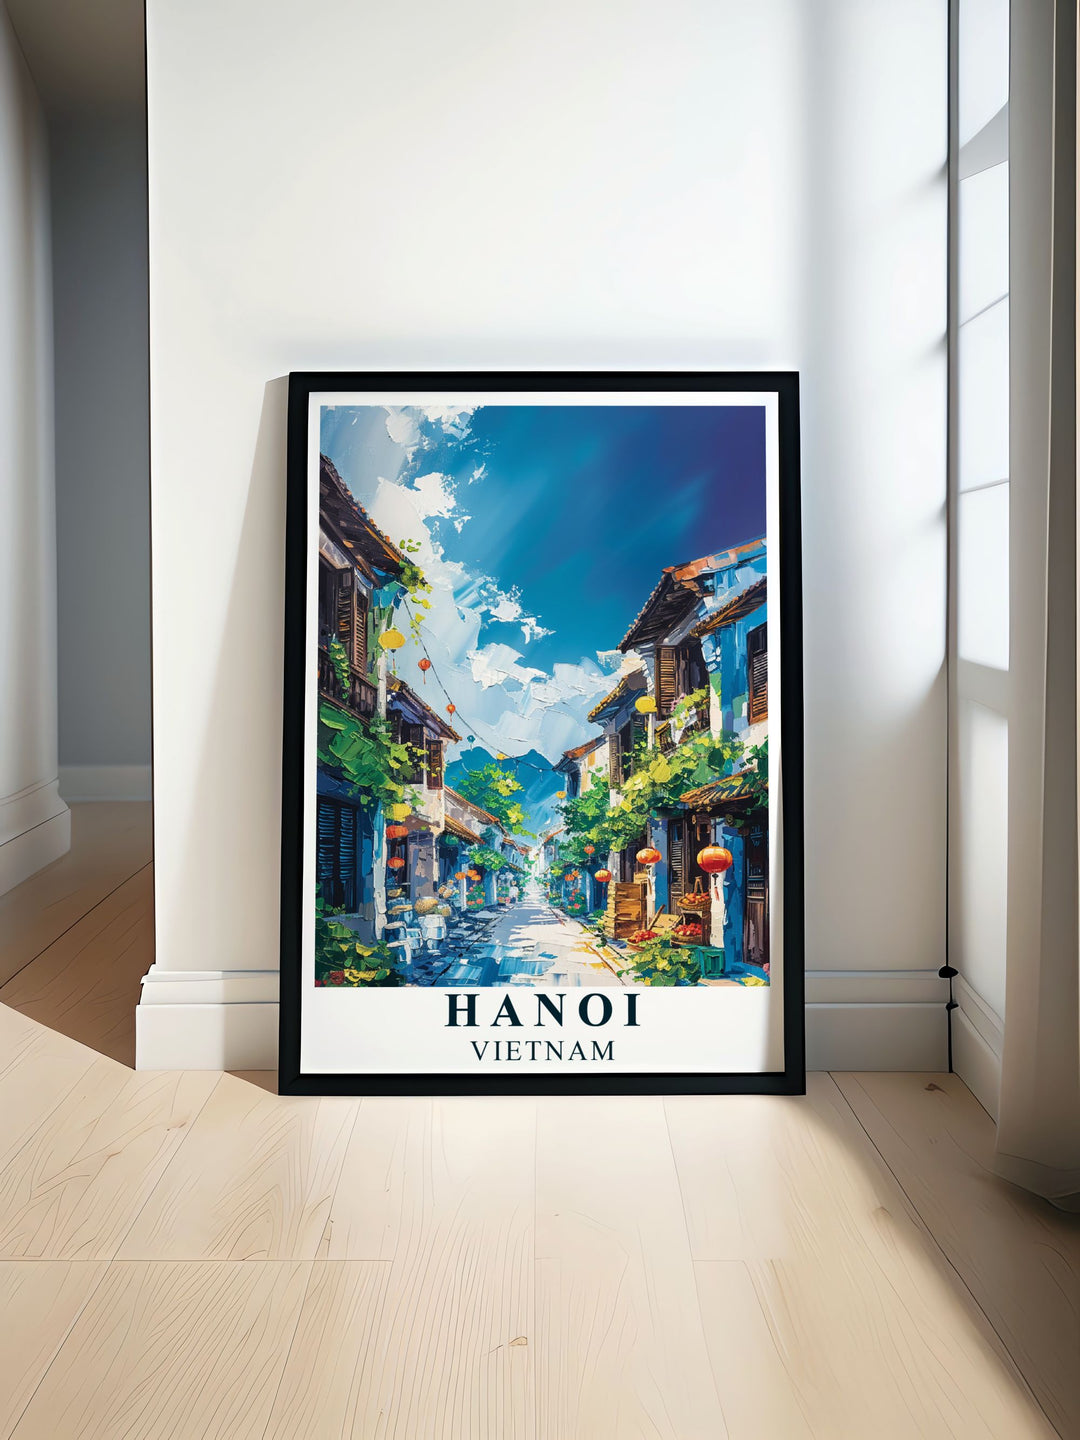 This detailed illustration of Hanois Old Quarter captures the lively streets and rich history of one of Asias oldest urban areas.